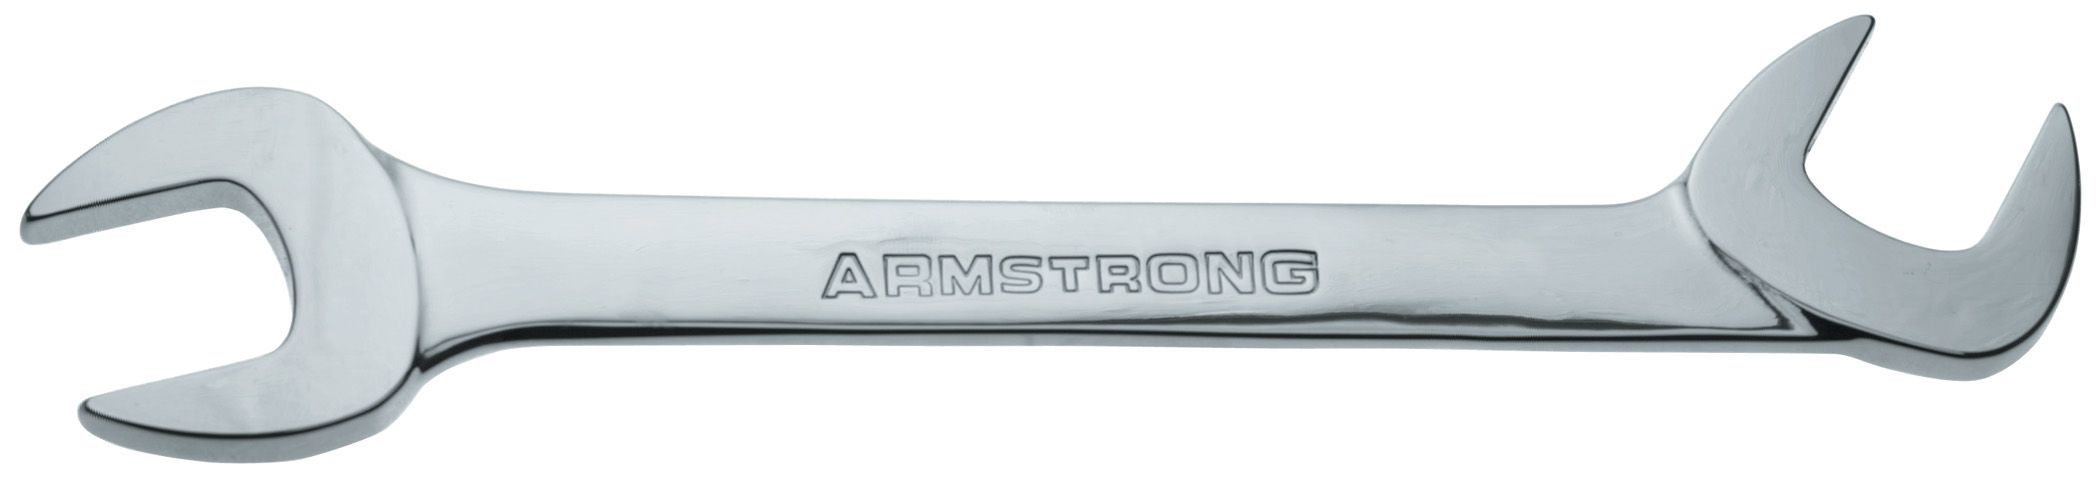 Armstrong 1-1/16 in. Full Polish 15&deg; and 60&deg; Open End Angle Wrench